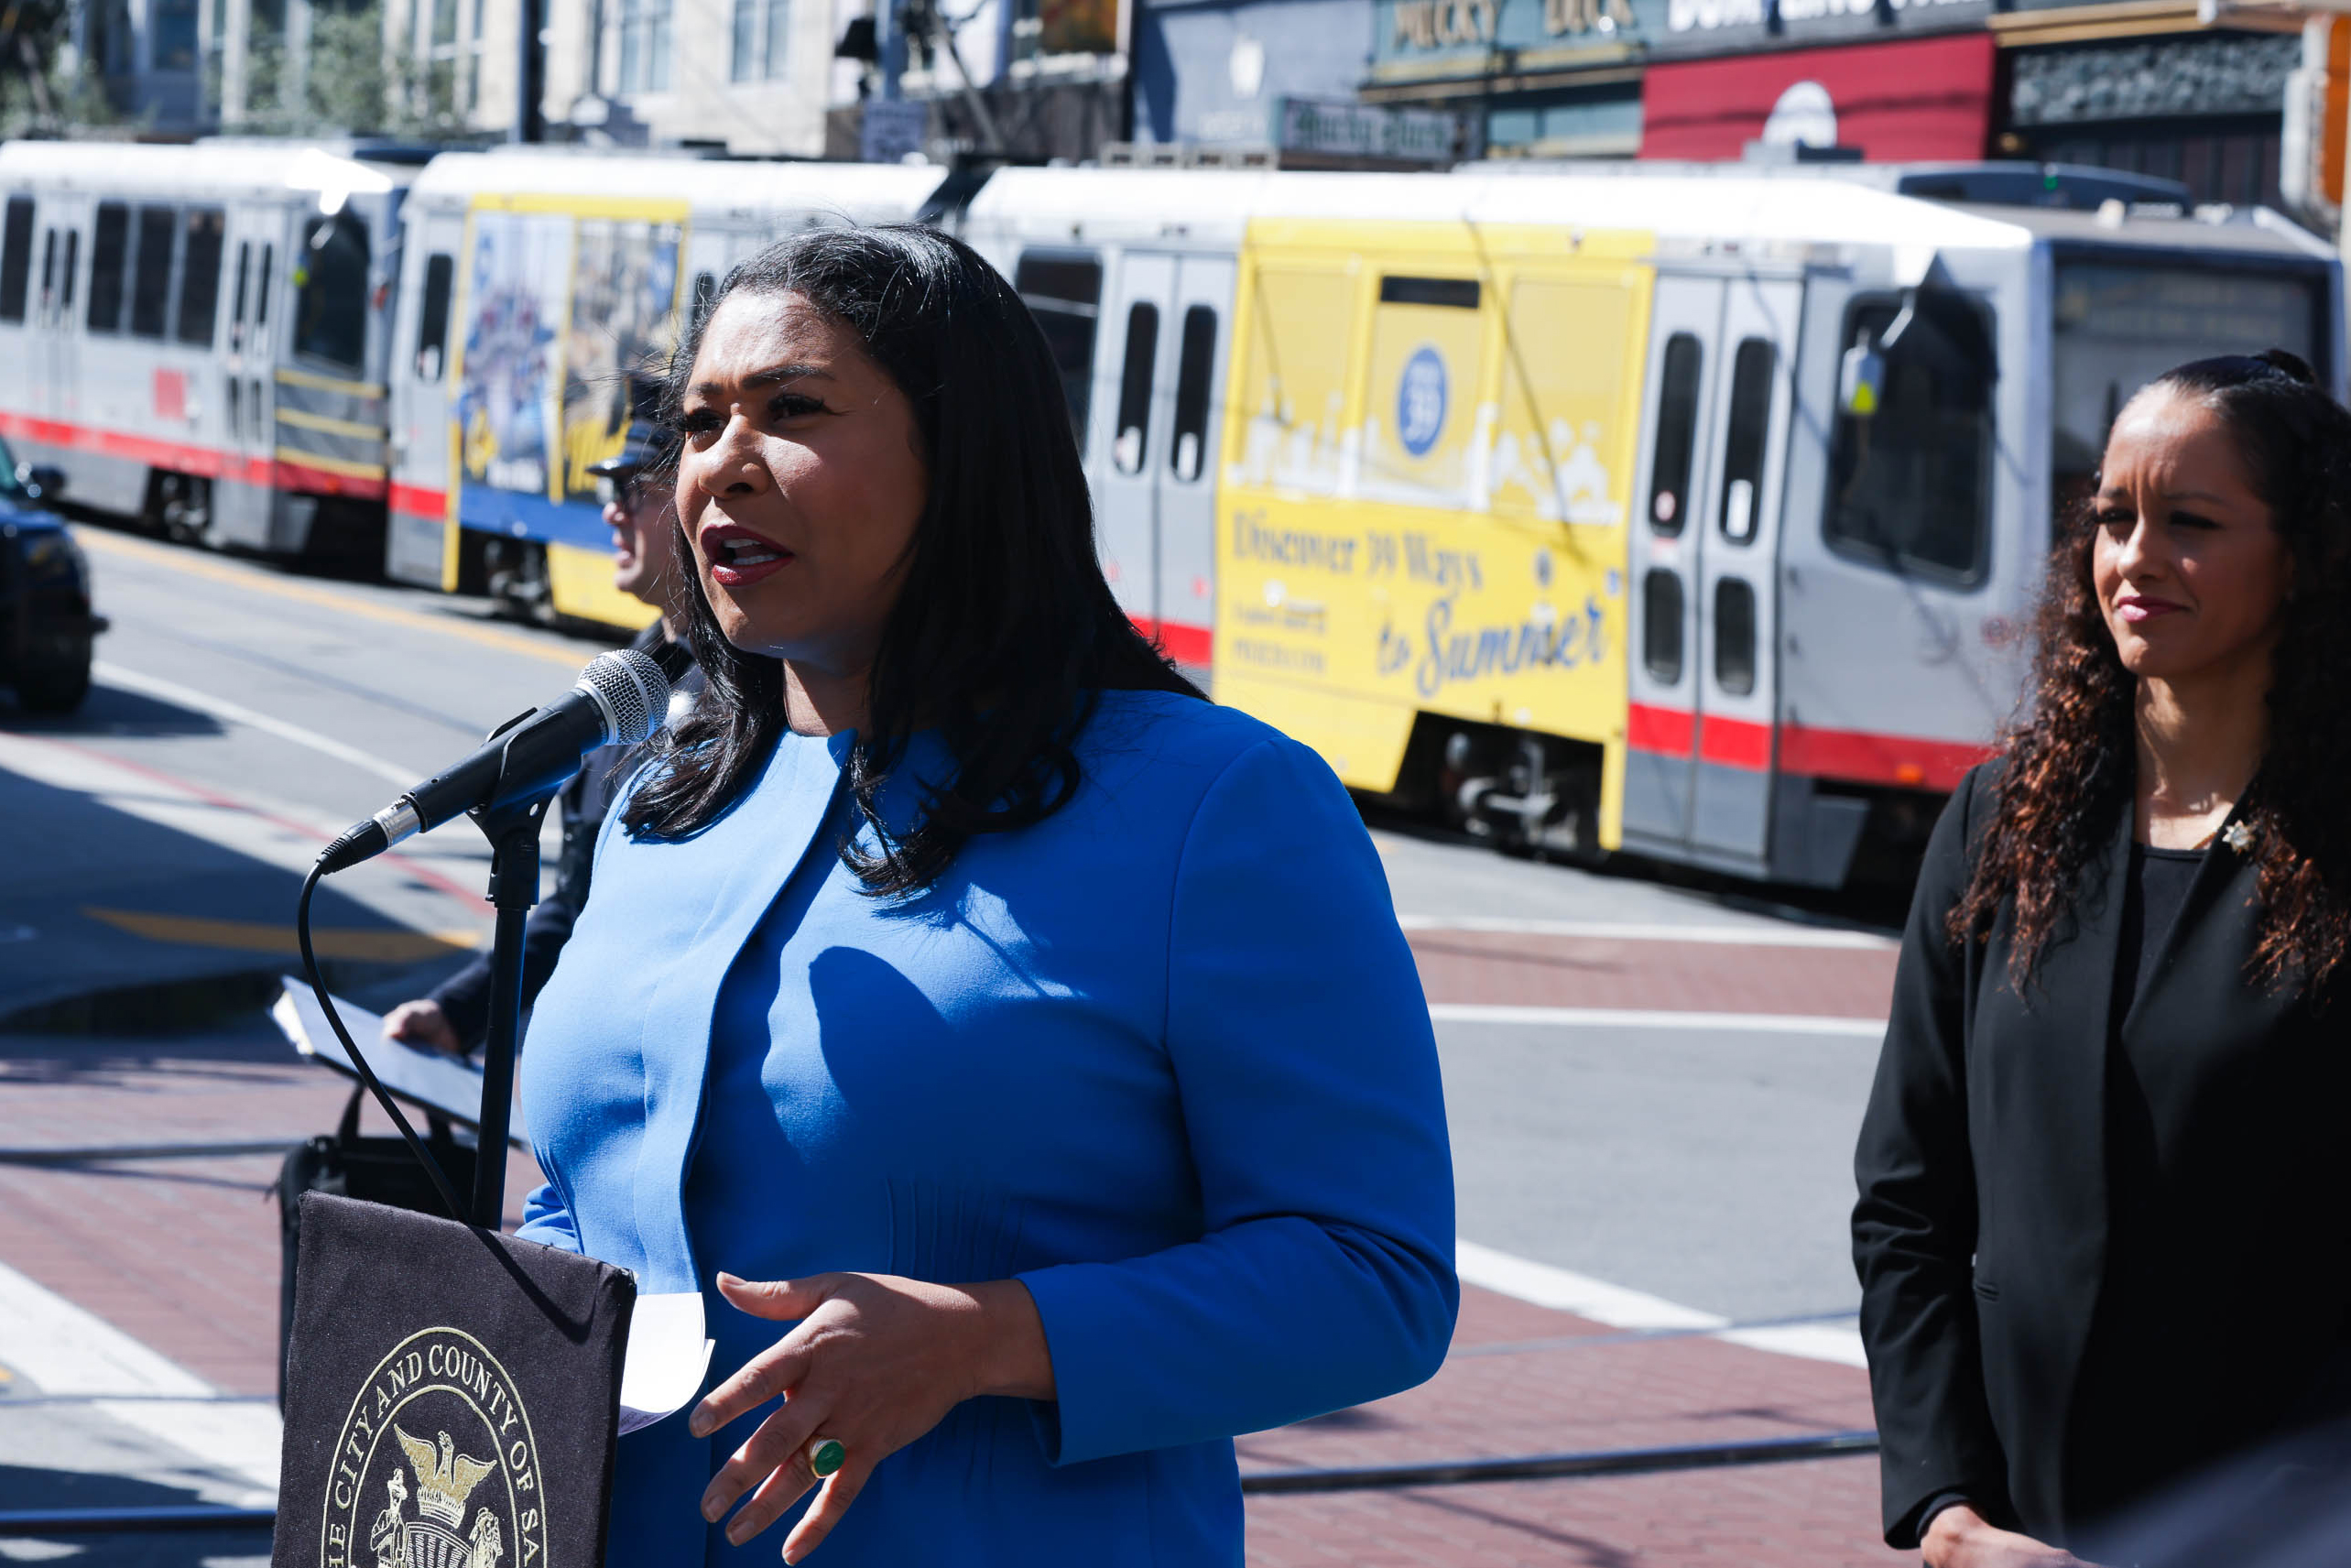 A woman in a blue suit speaks into a microphone at an outdoor event, while another woman in black stands beside her. A city light rail train is in the background.